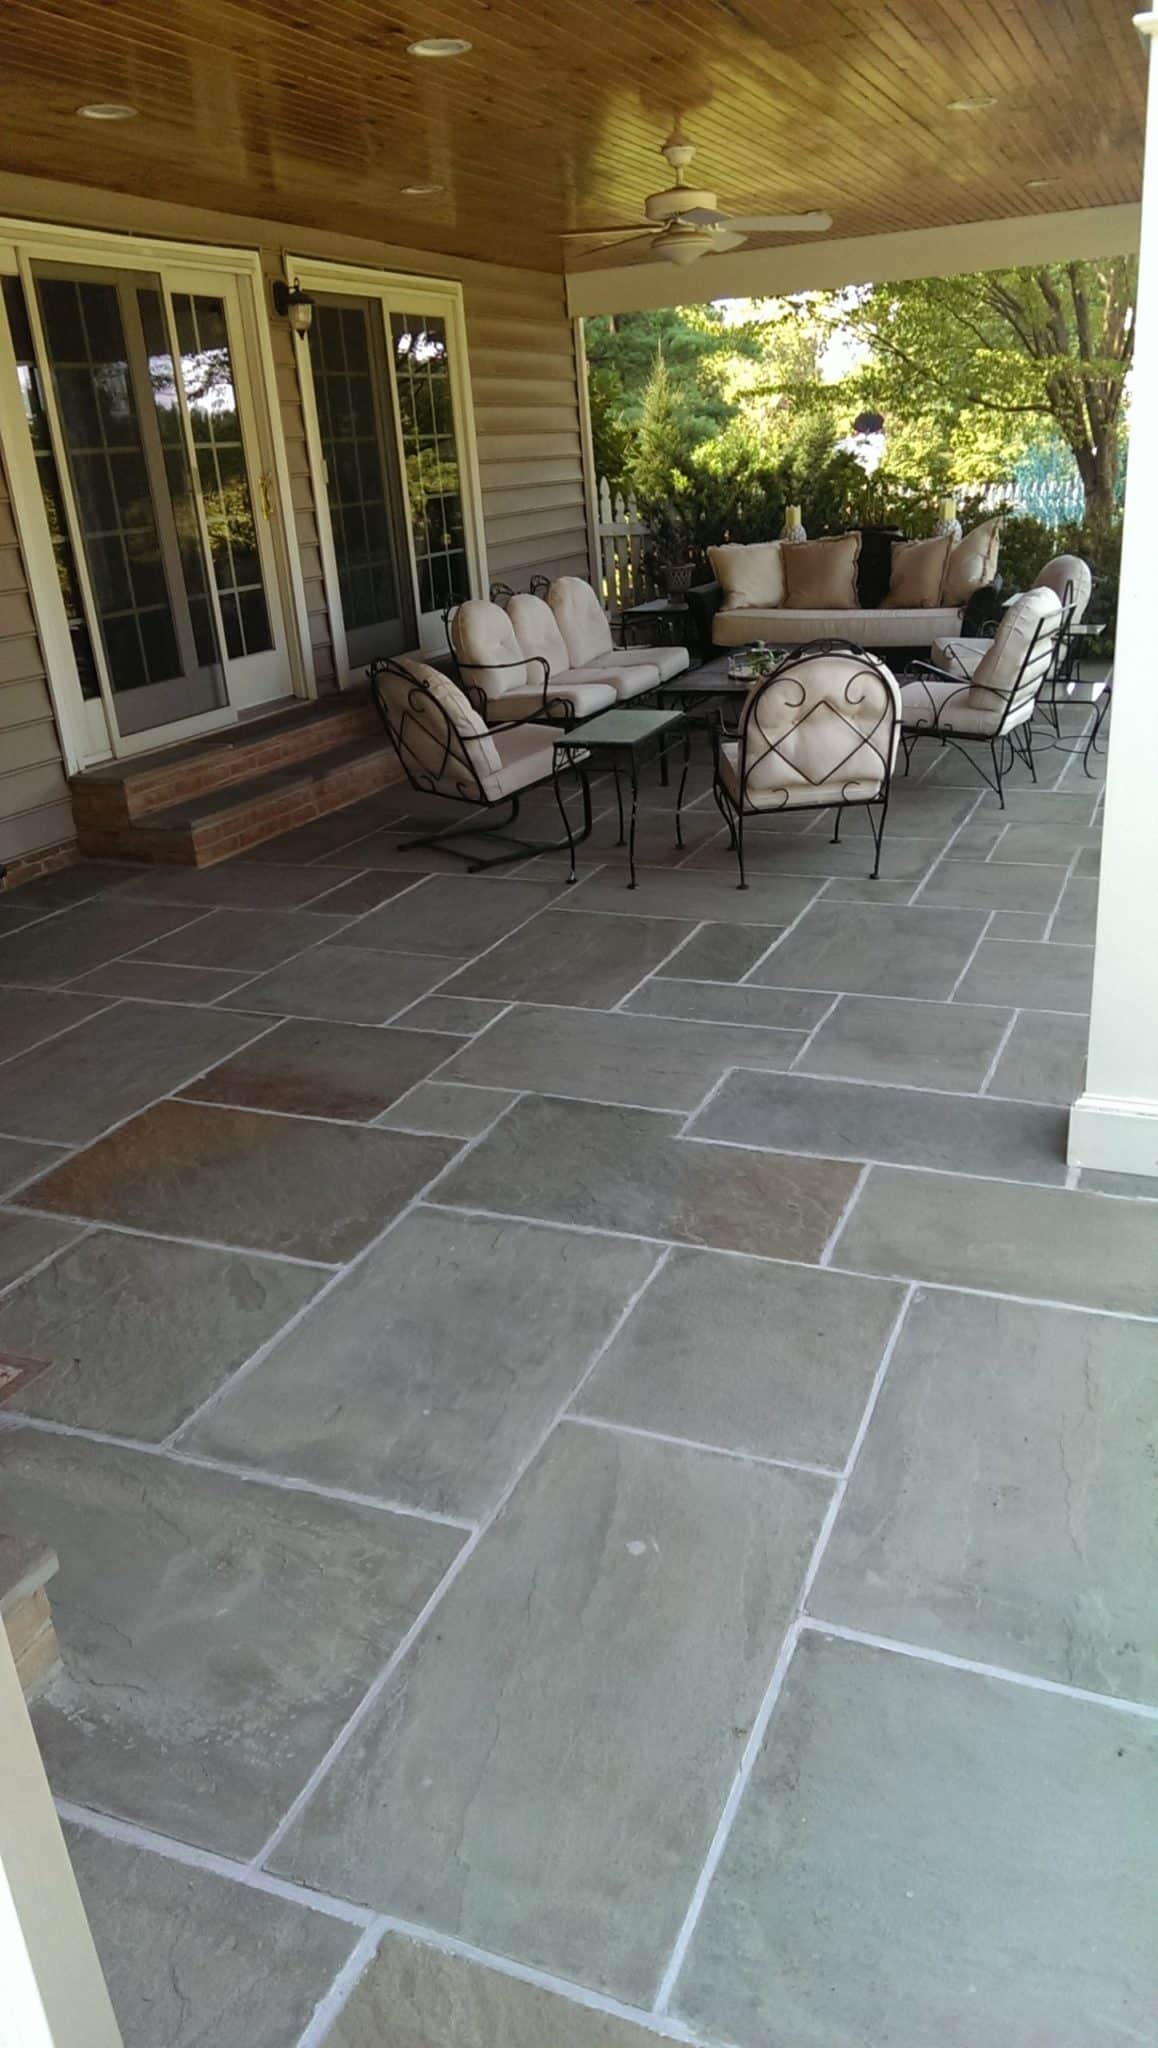 Covered Flagstone Patio